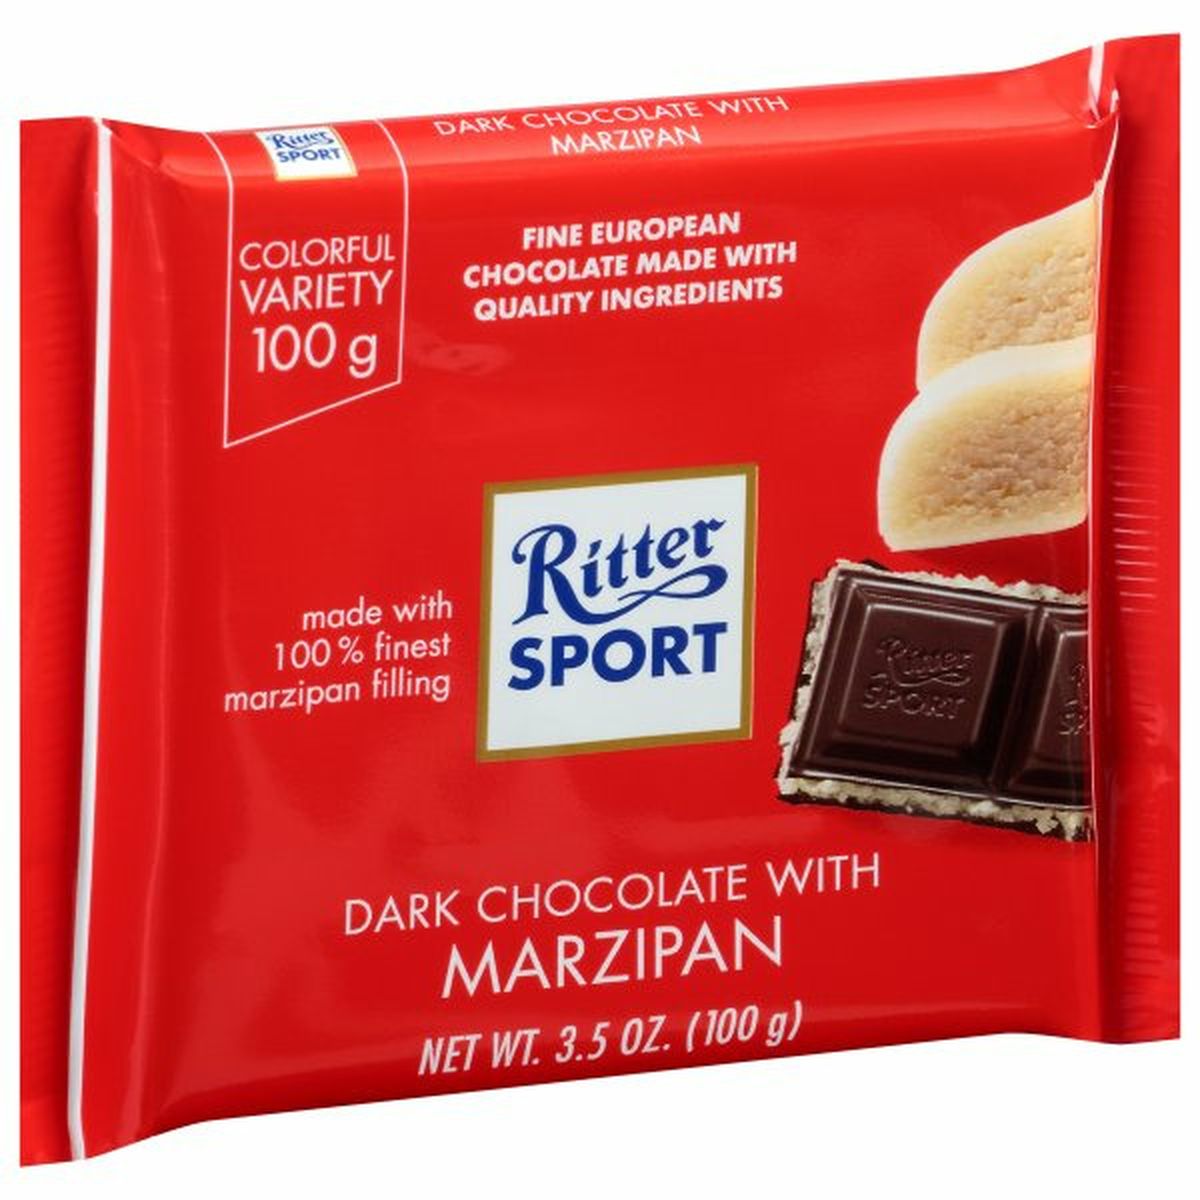 Calories in Ritter Sport Dark Chocolate, with Marzipan